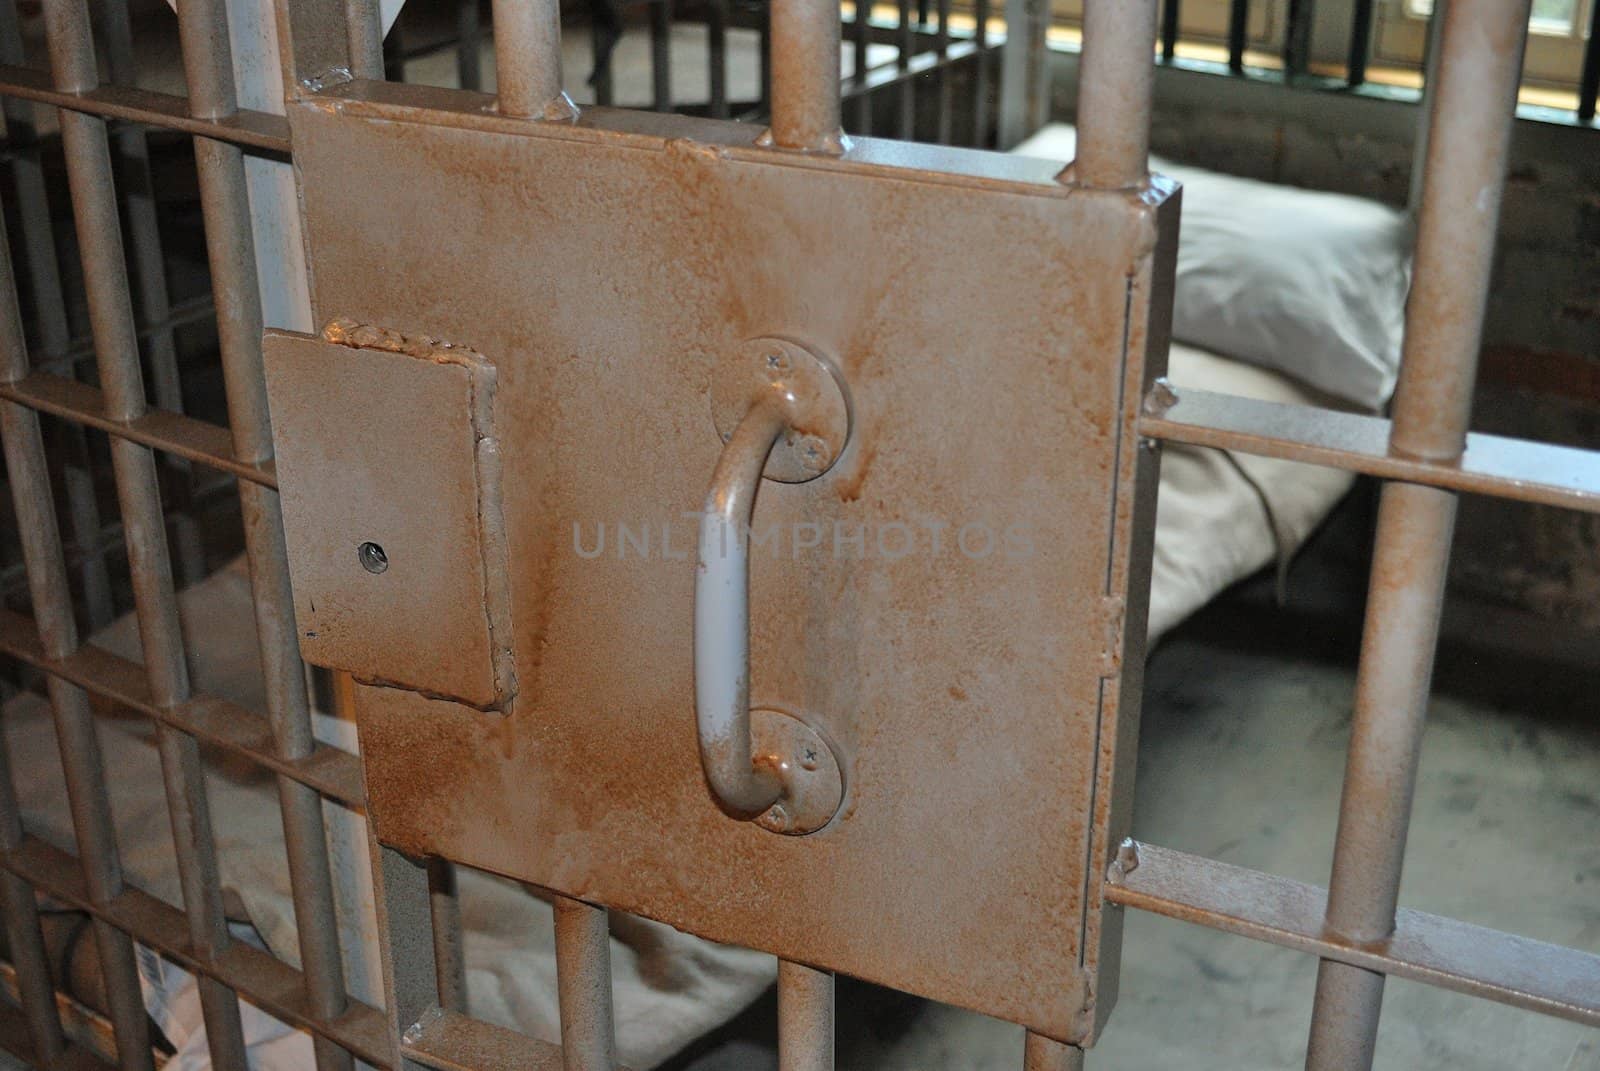 A view through a jail cell door bars revealing a small cot